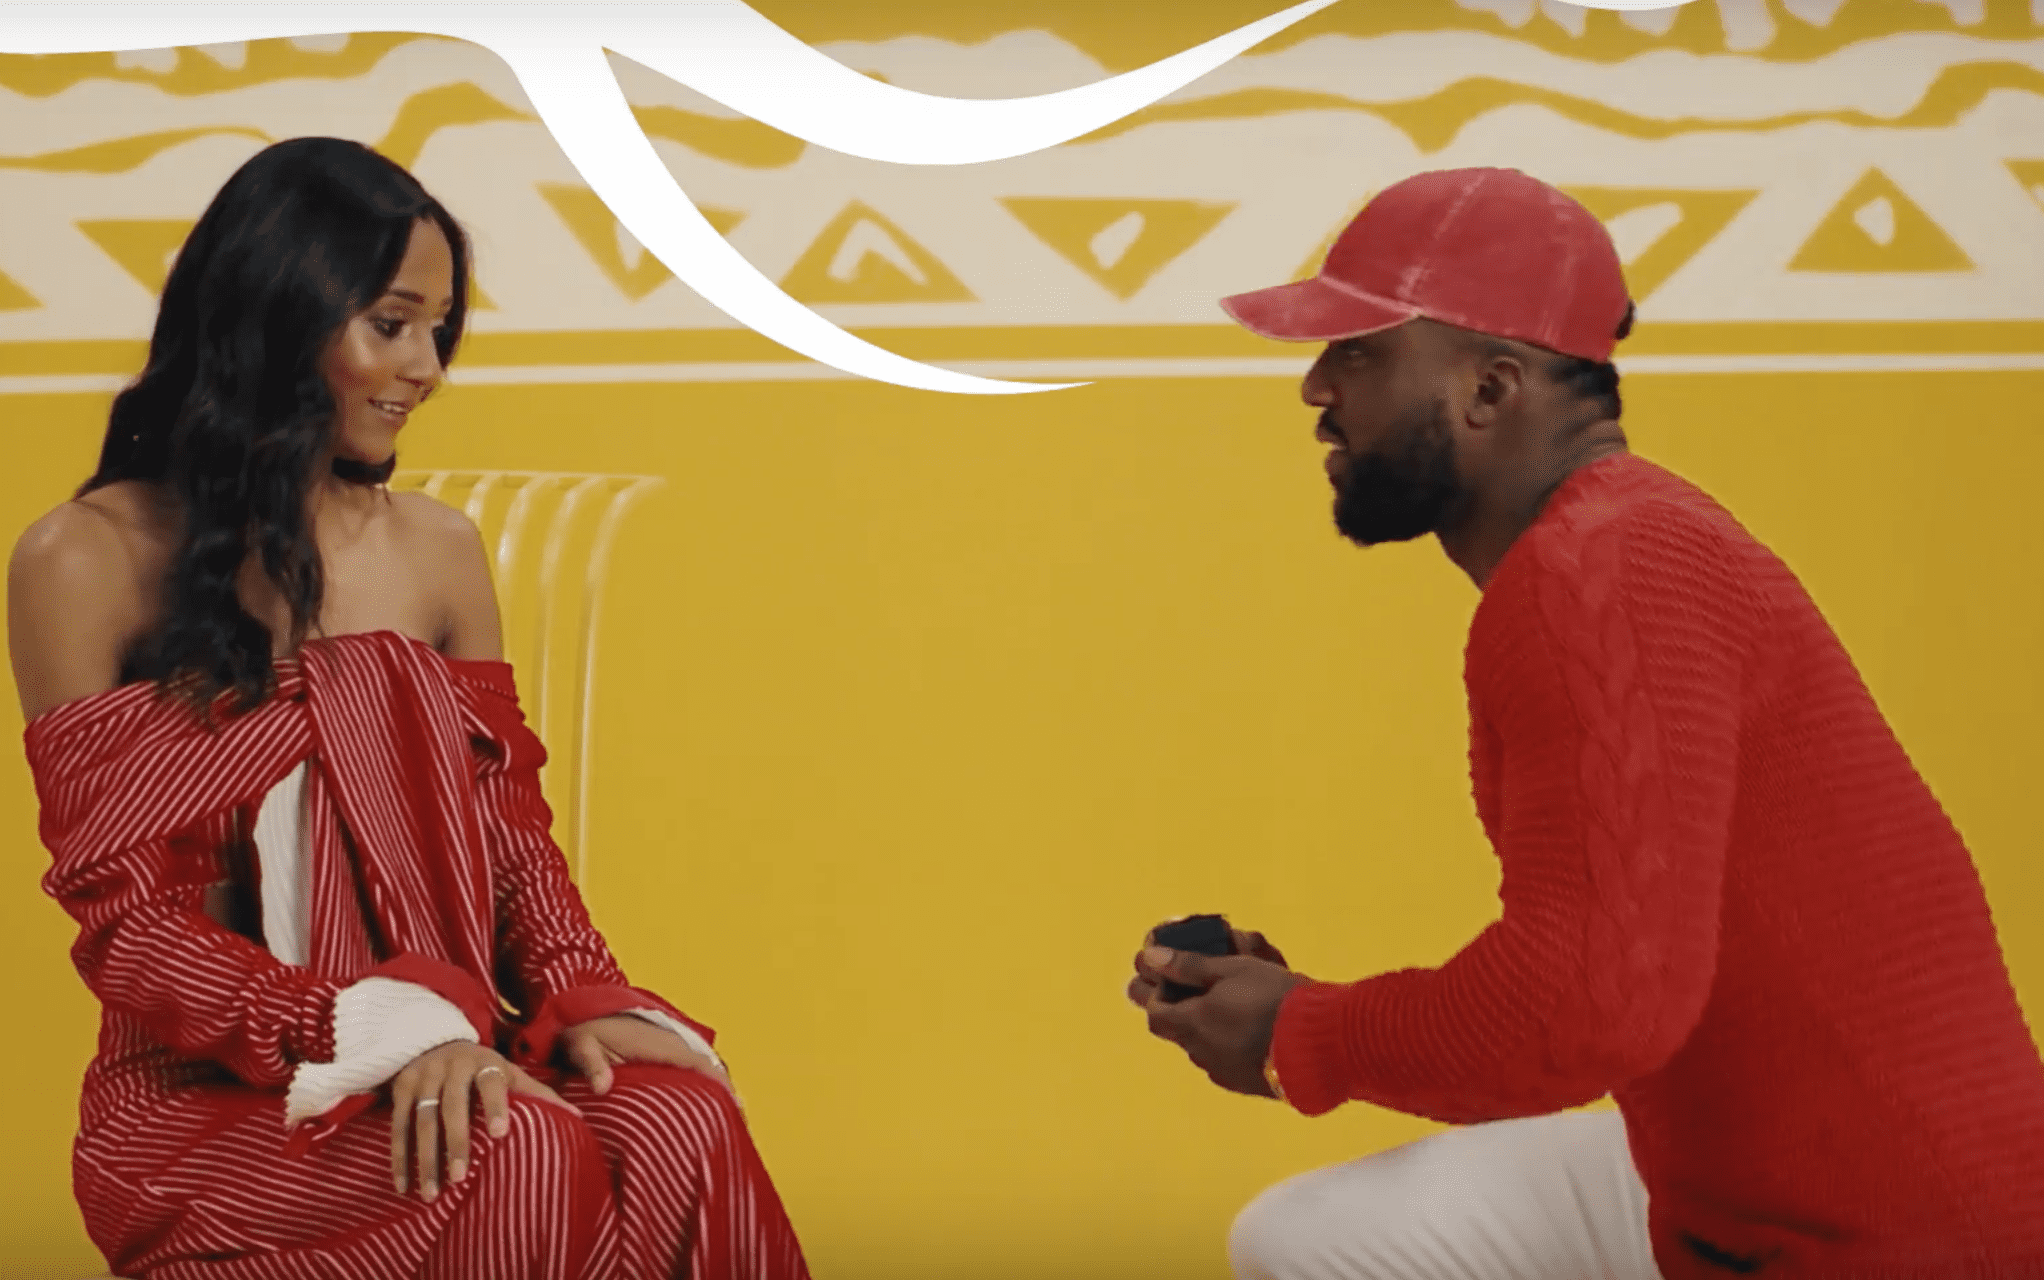 Watch Iyanya propose to his lover in “Bow For You”